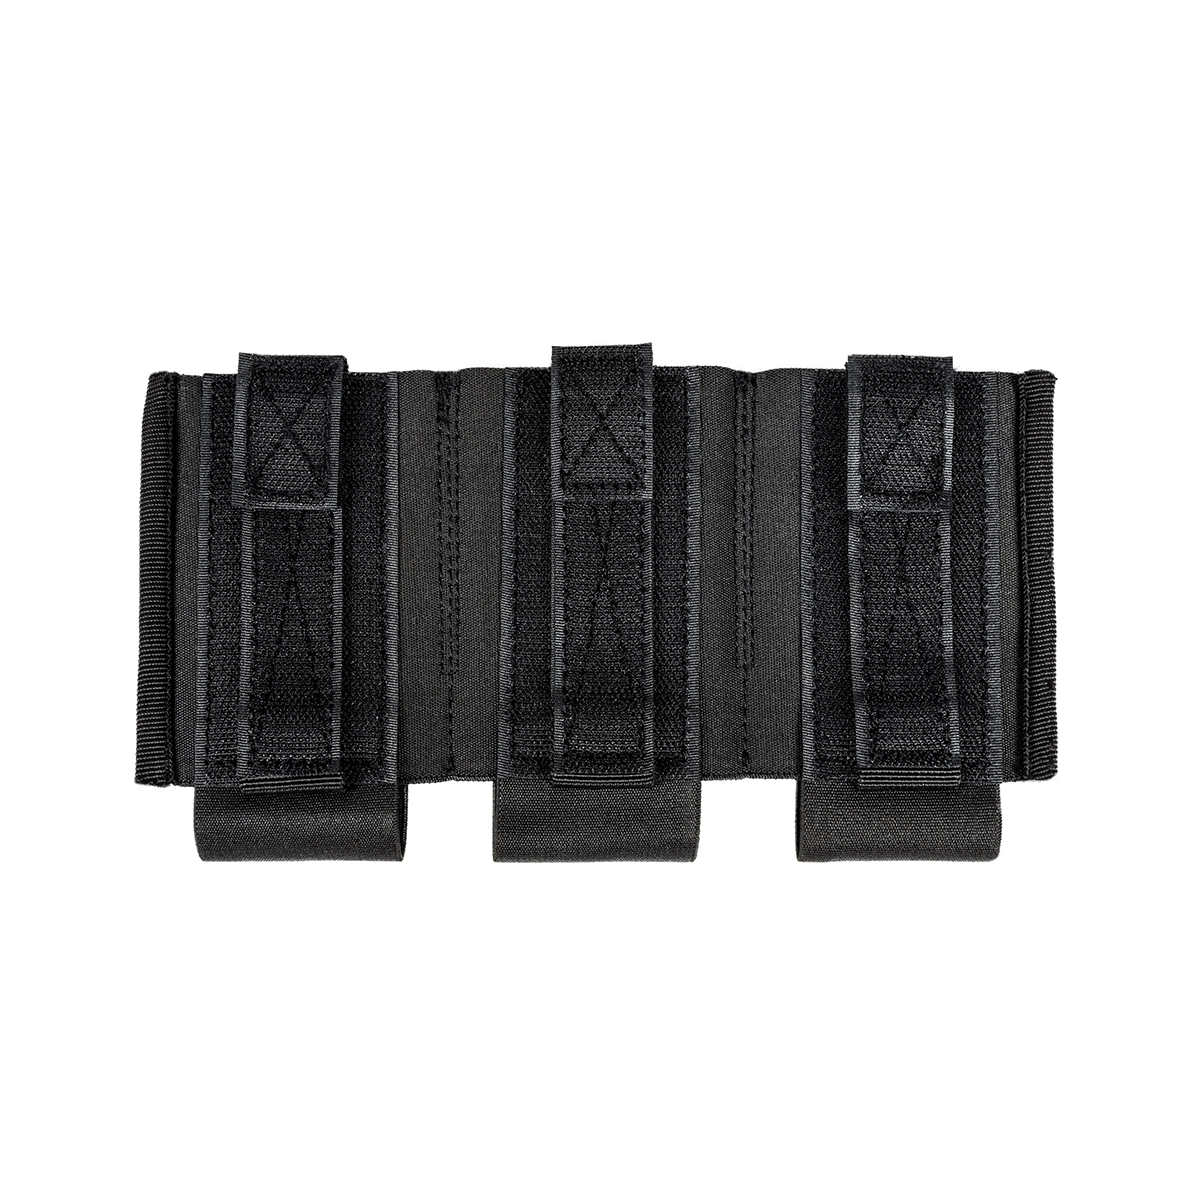 HK Army Rifle Mag Cell (3-Cell) Black